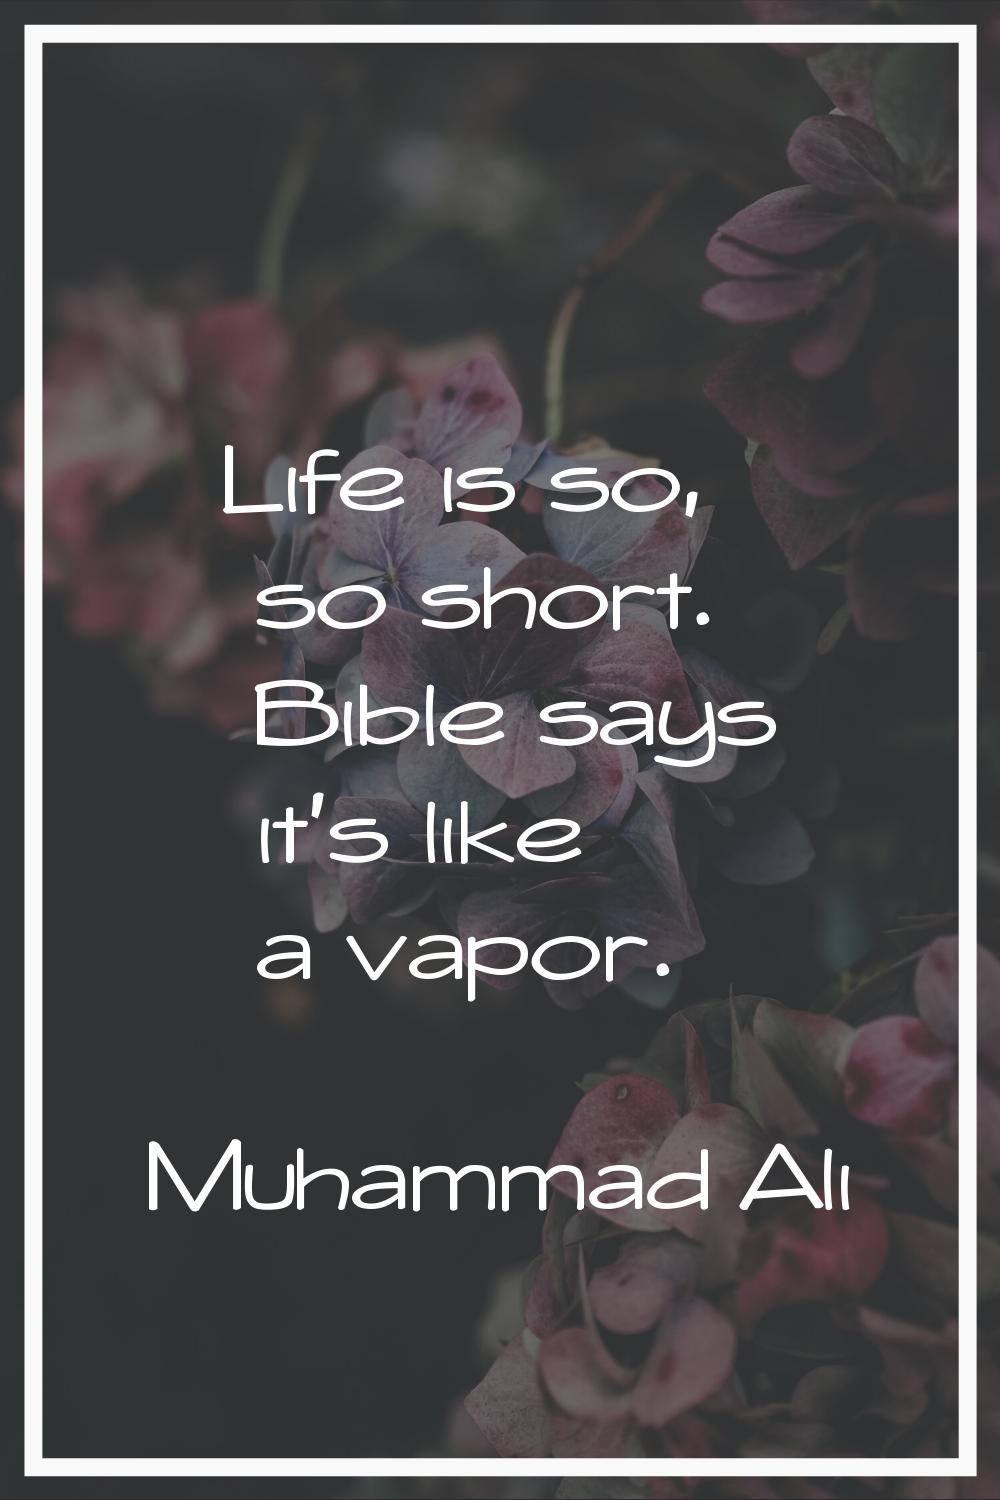 Life is so, so short. Bible says it's like a vapor.